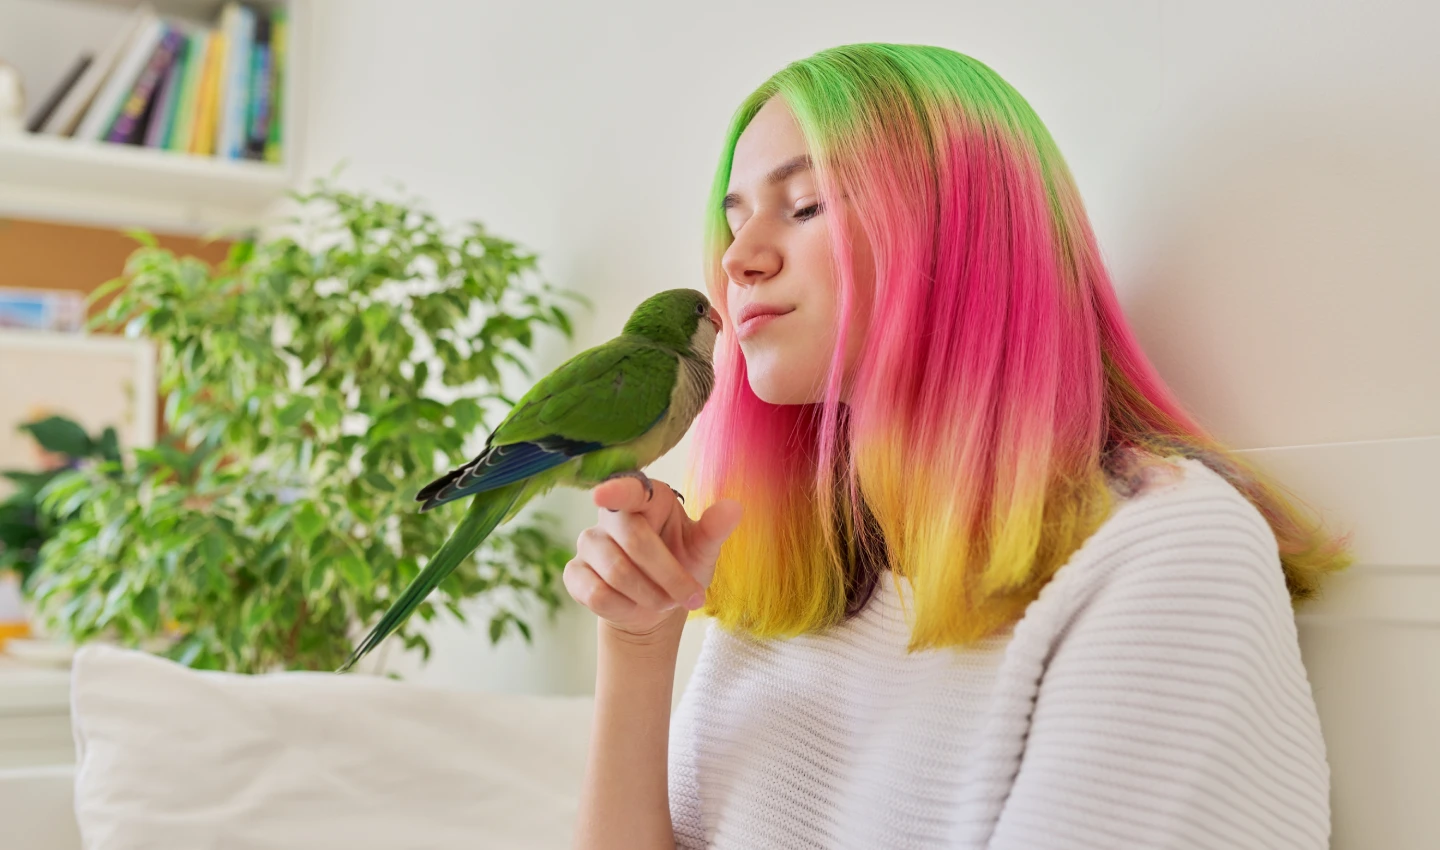 A teenager girl with pastel-colored hair kissing a green quaker parrot up close.